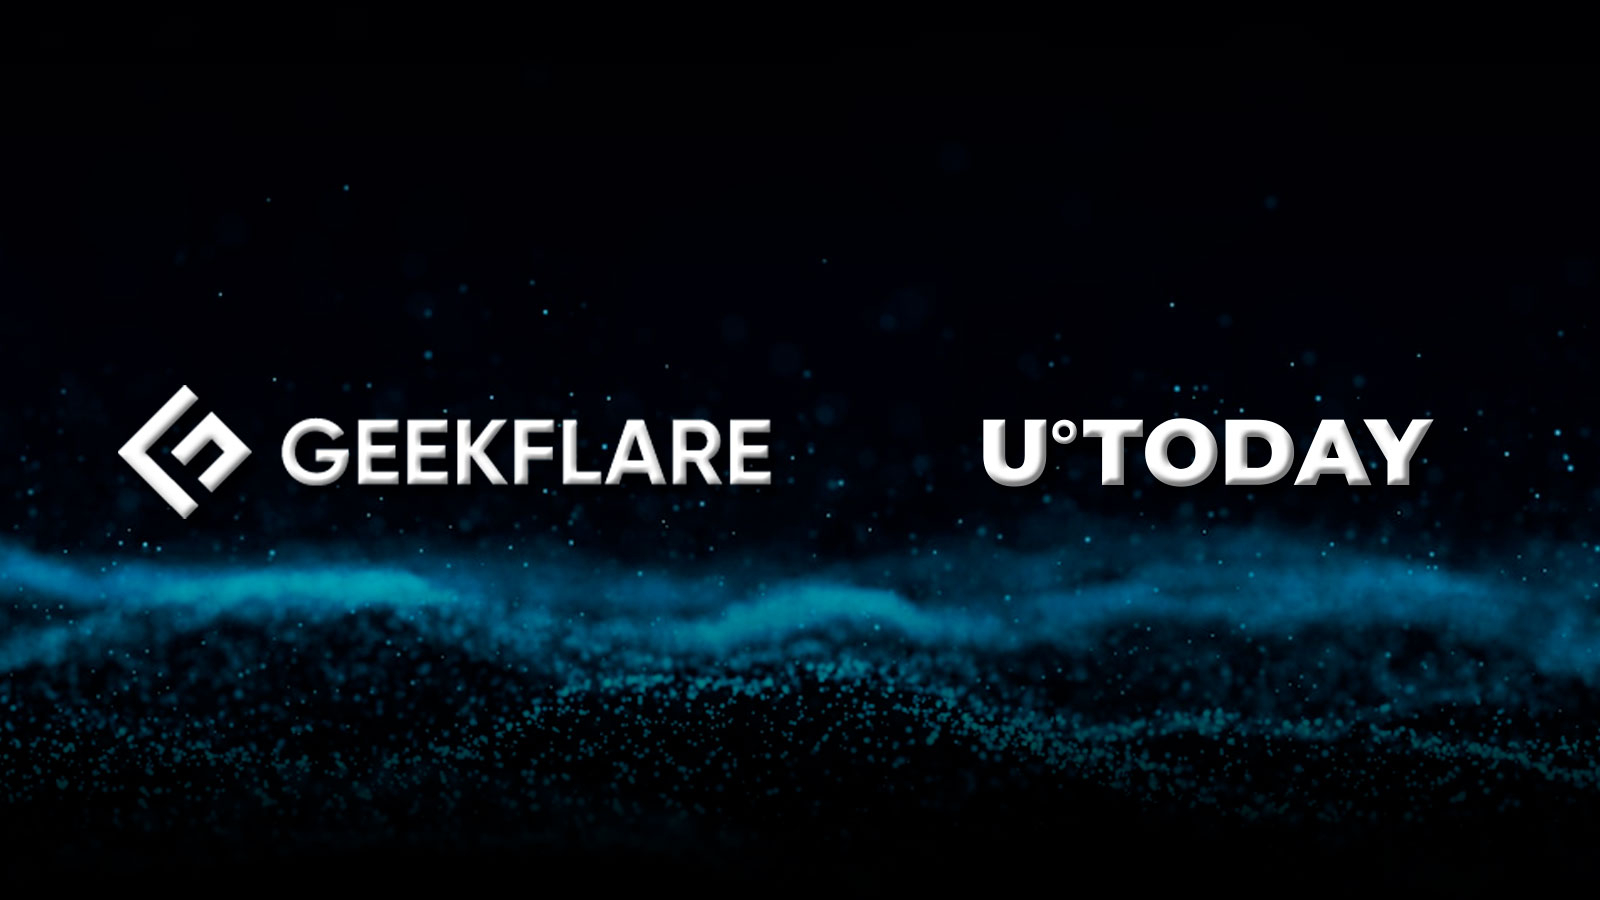 Geekflare Scores Partnership with U.Today, Rolls Out API Functionality